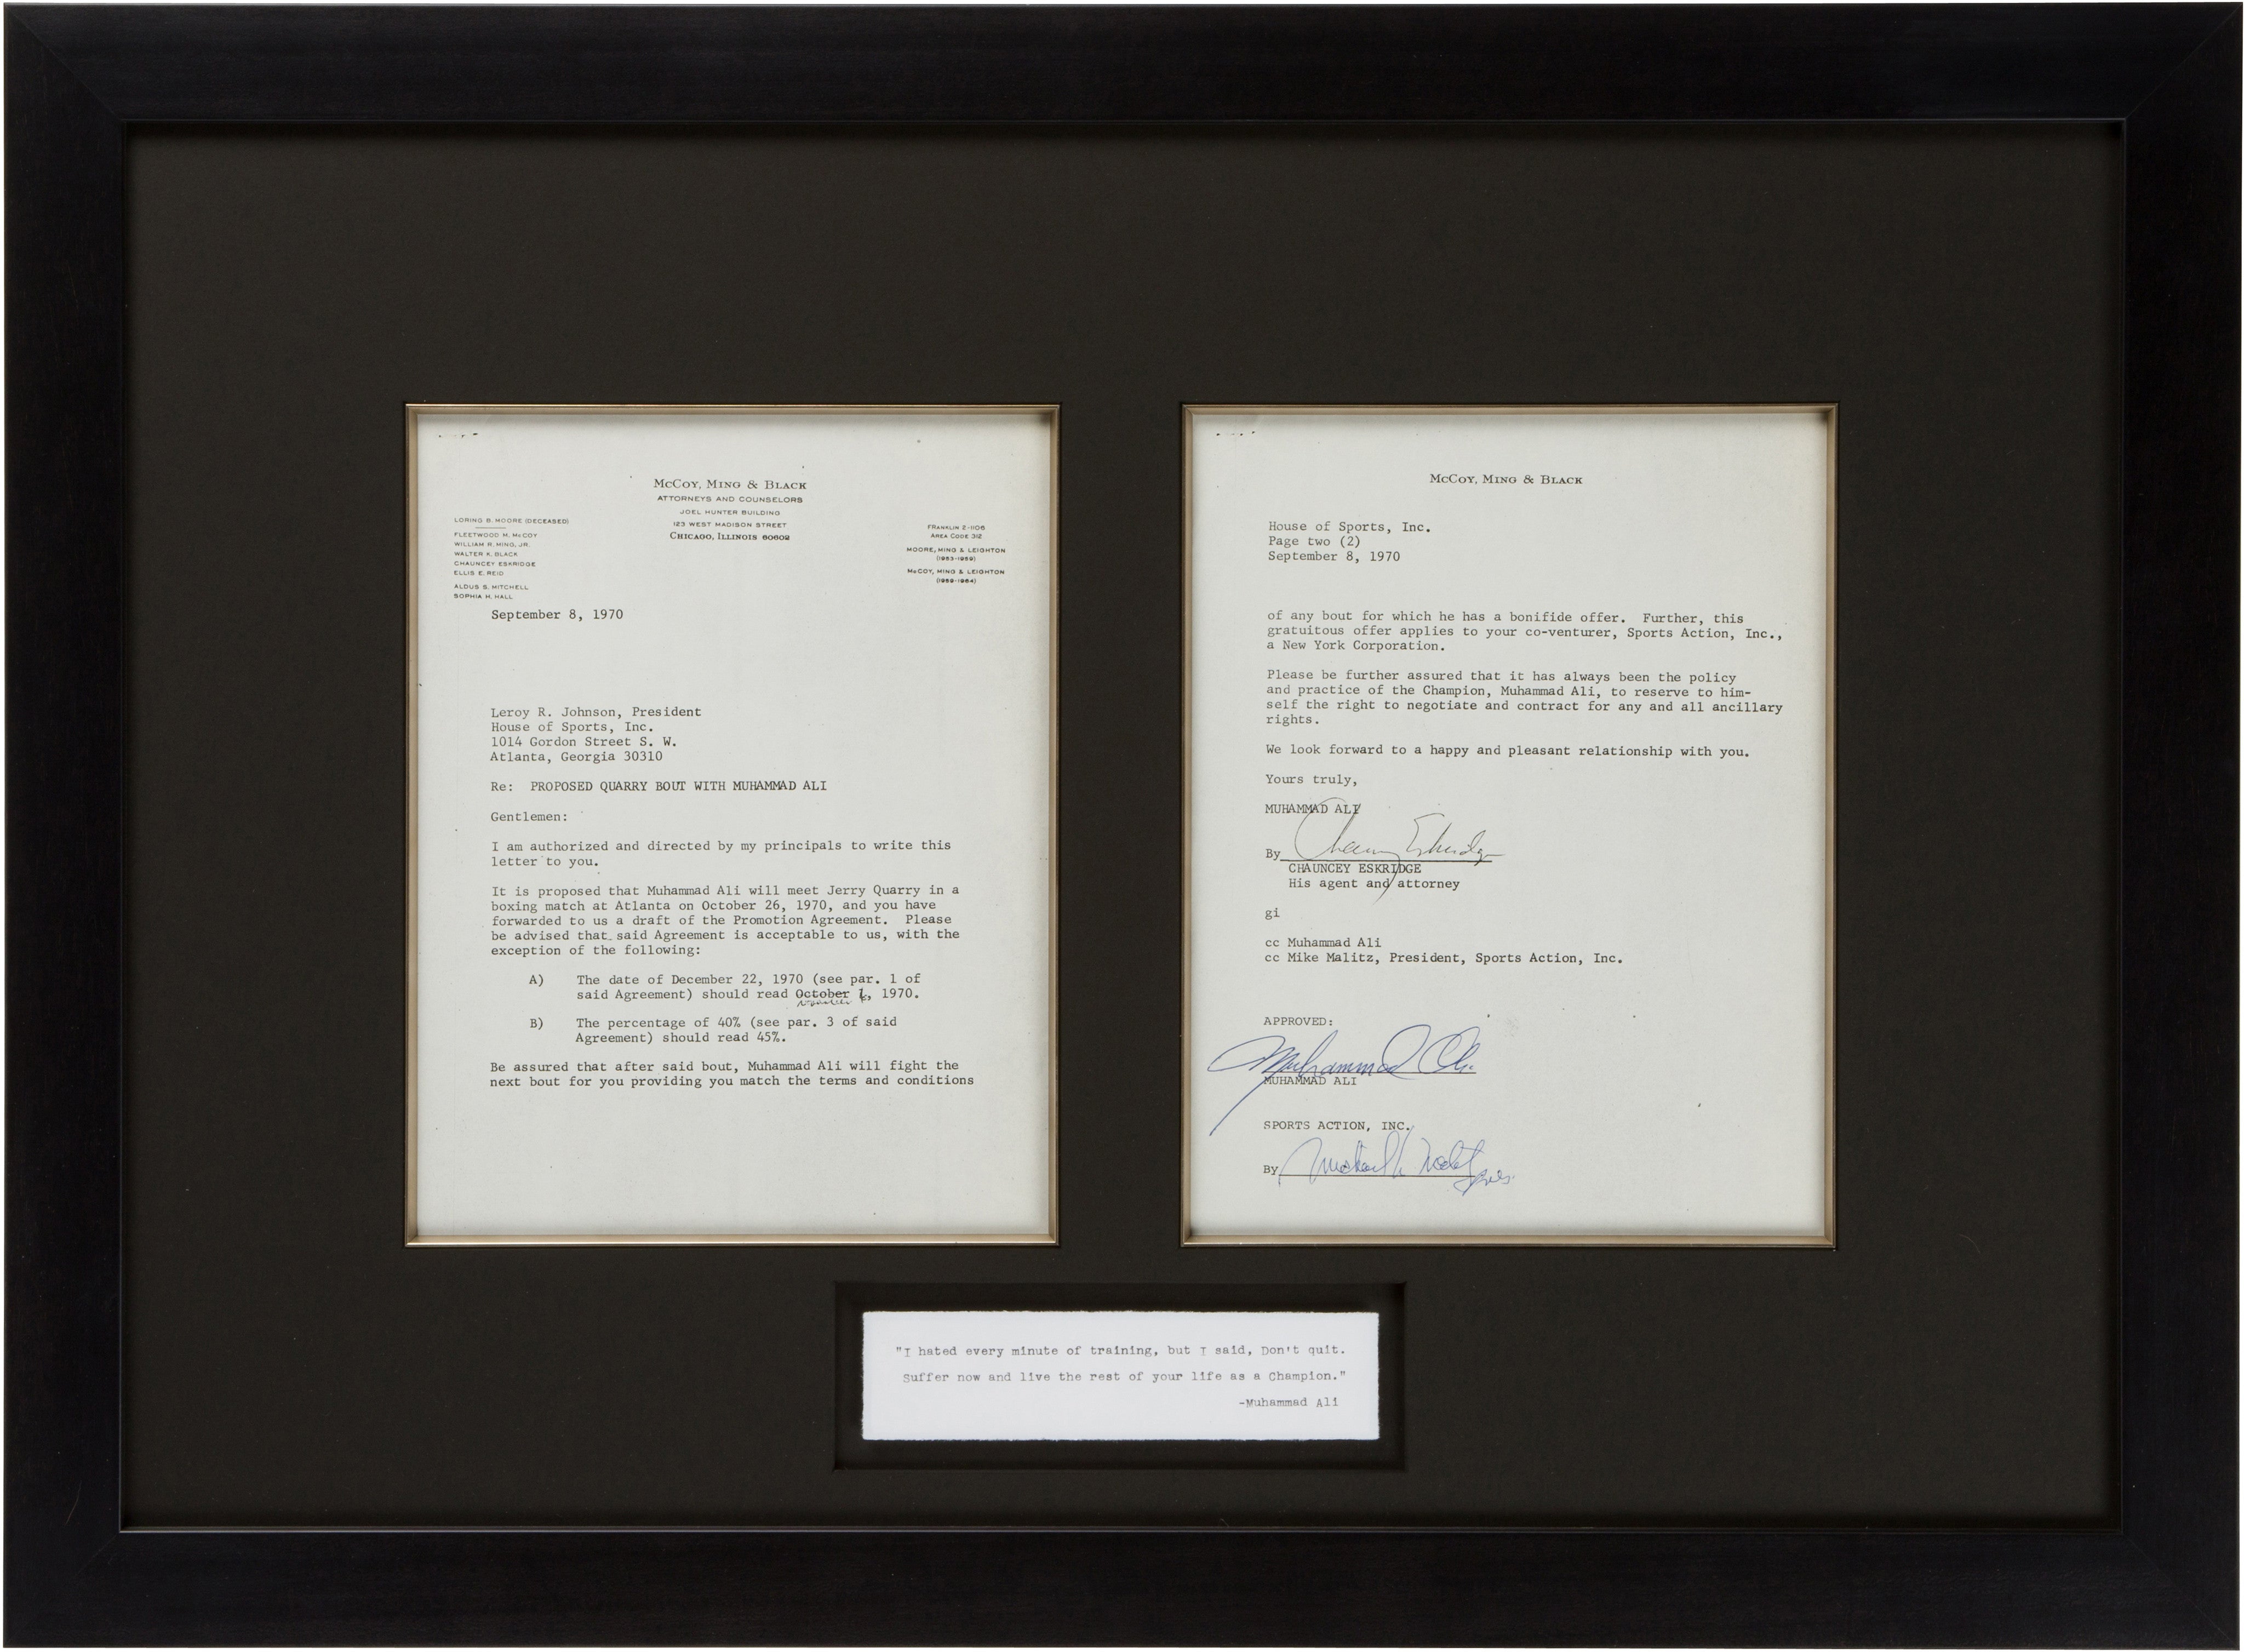 Rare Muhammad Ali Signed 1970 Fight Contract: "It is proposed that Muhammad Ali will meet Jerry Quarry in a boxing match at Atlanta on October 26, 1970.“